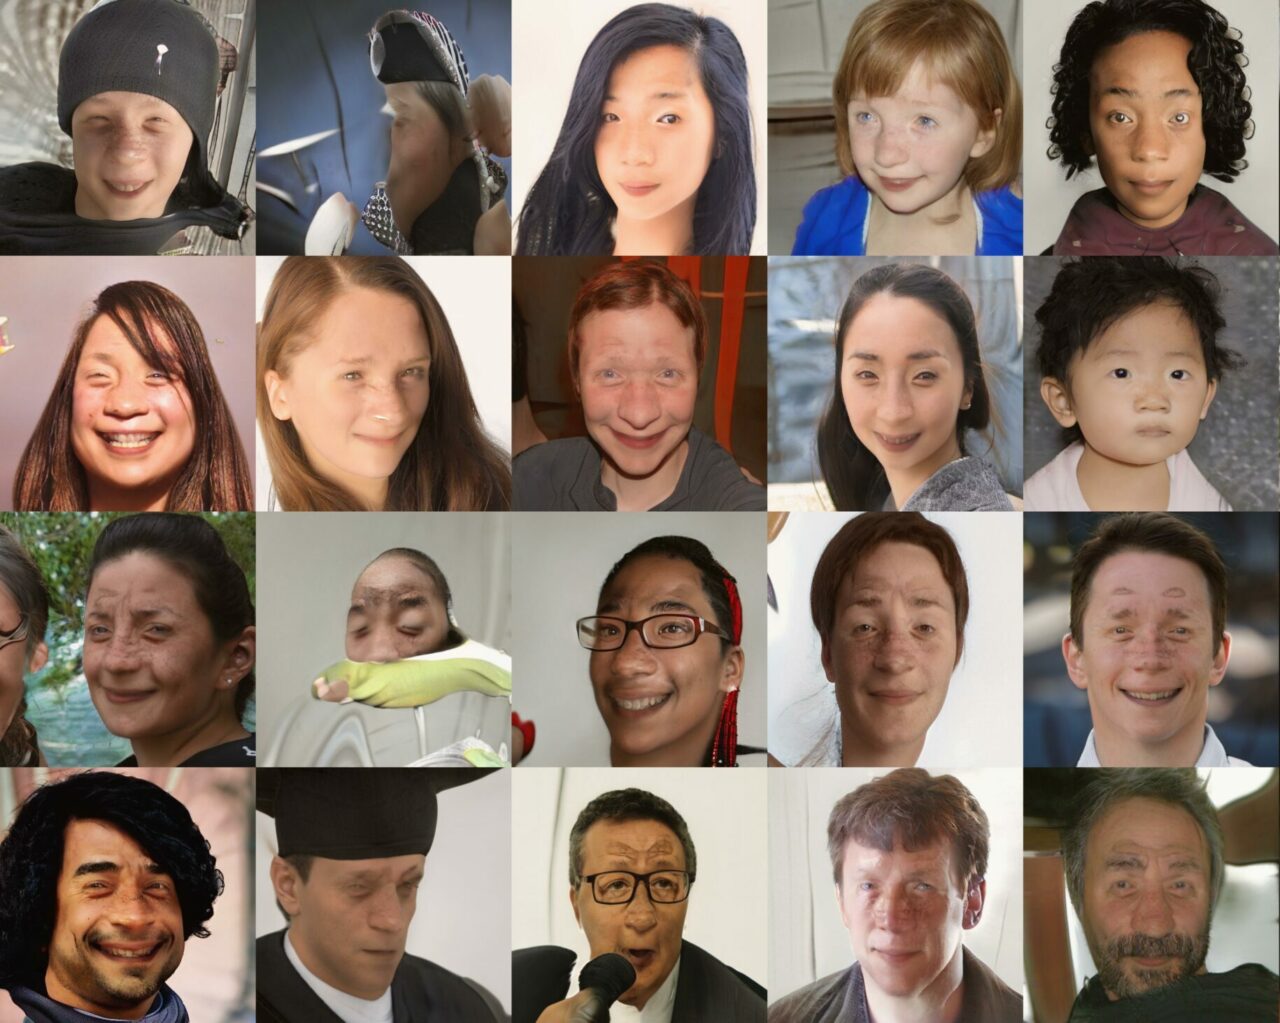 A tiled image of monstrous faces generated by a machine learning algorithm.